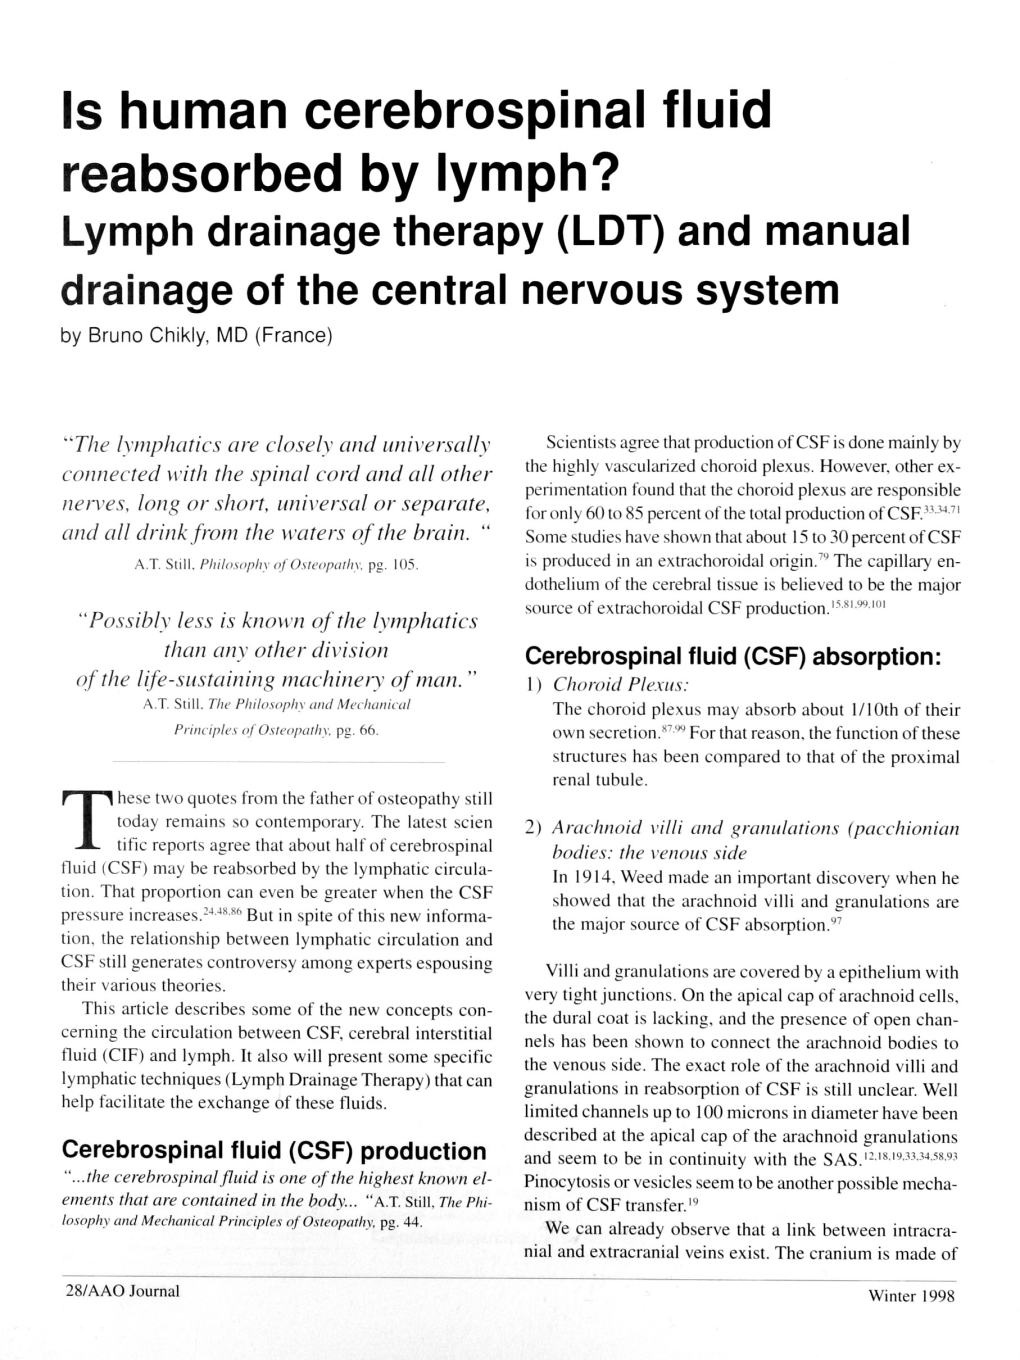 Is Human Cerebrospinal Fluid Reabsorbed by Lymph? Lymph Drainage Therapy (LDT) and Manual Drainage of the Central Nervous System by Bruno Chikly, MD (France)